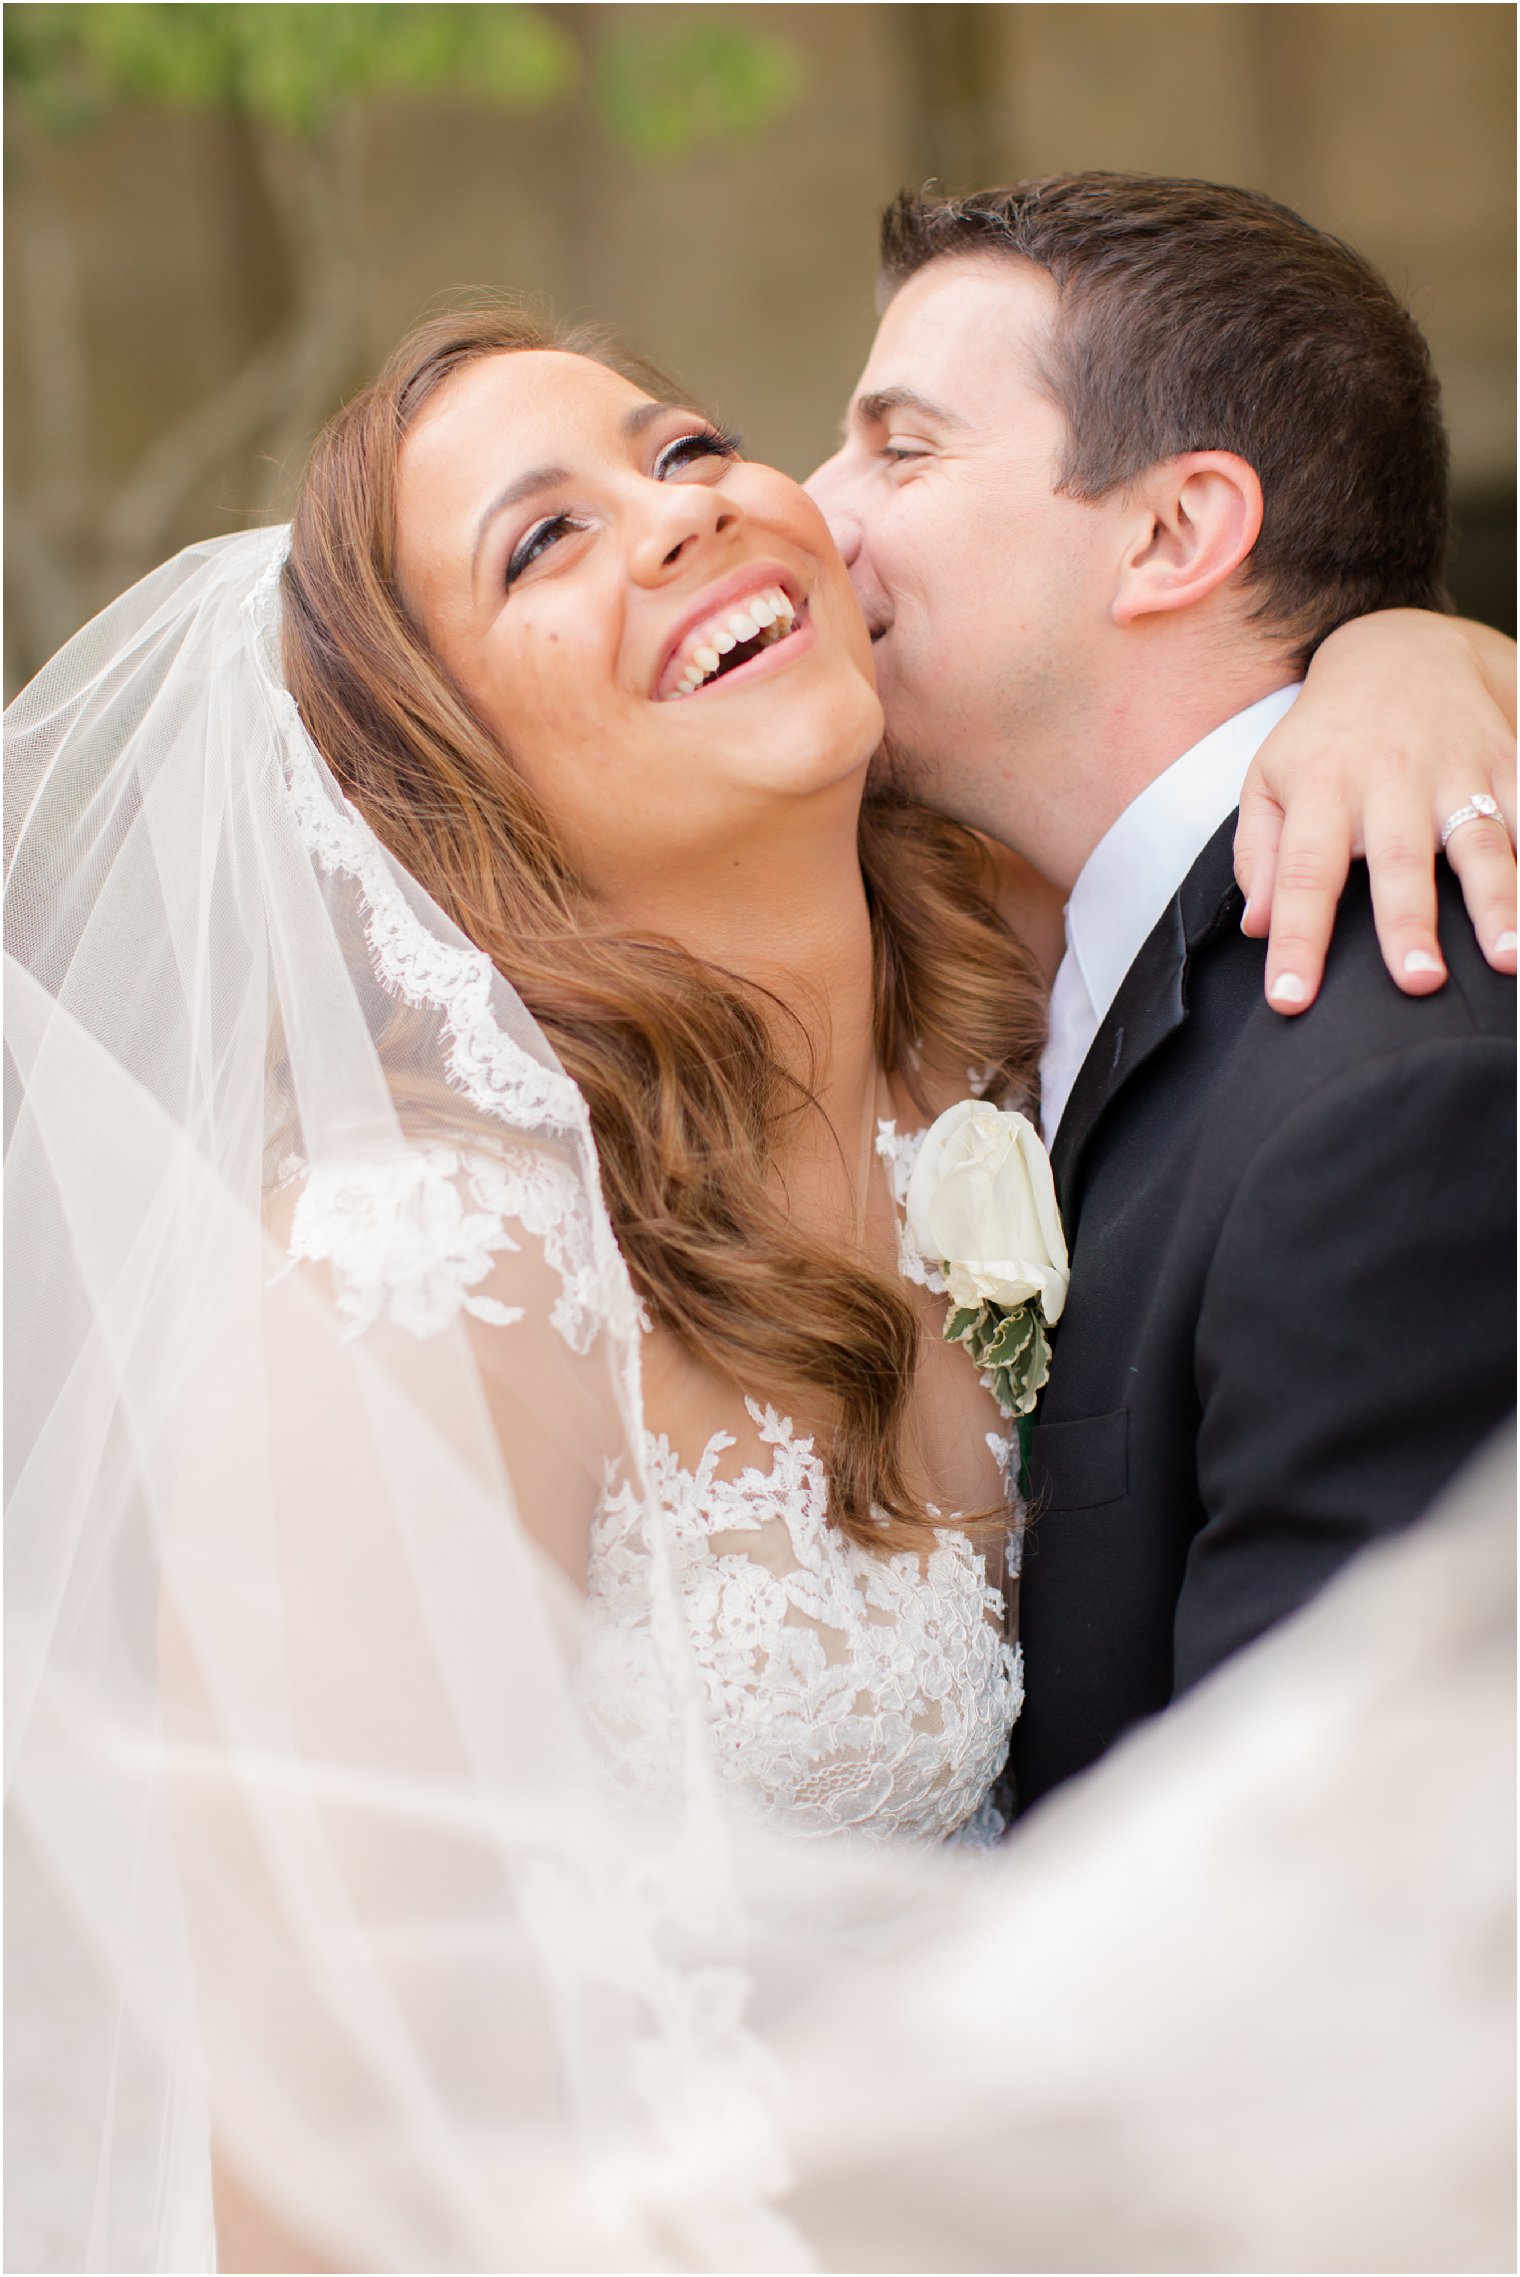 photo of bride laughing while groom kisses her